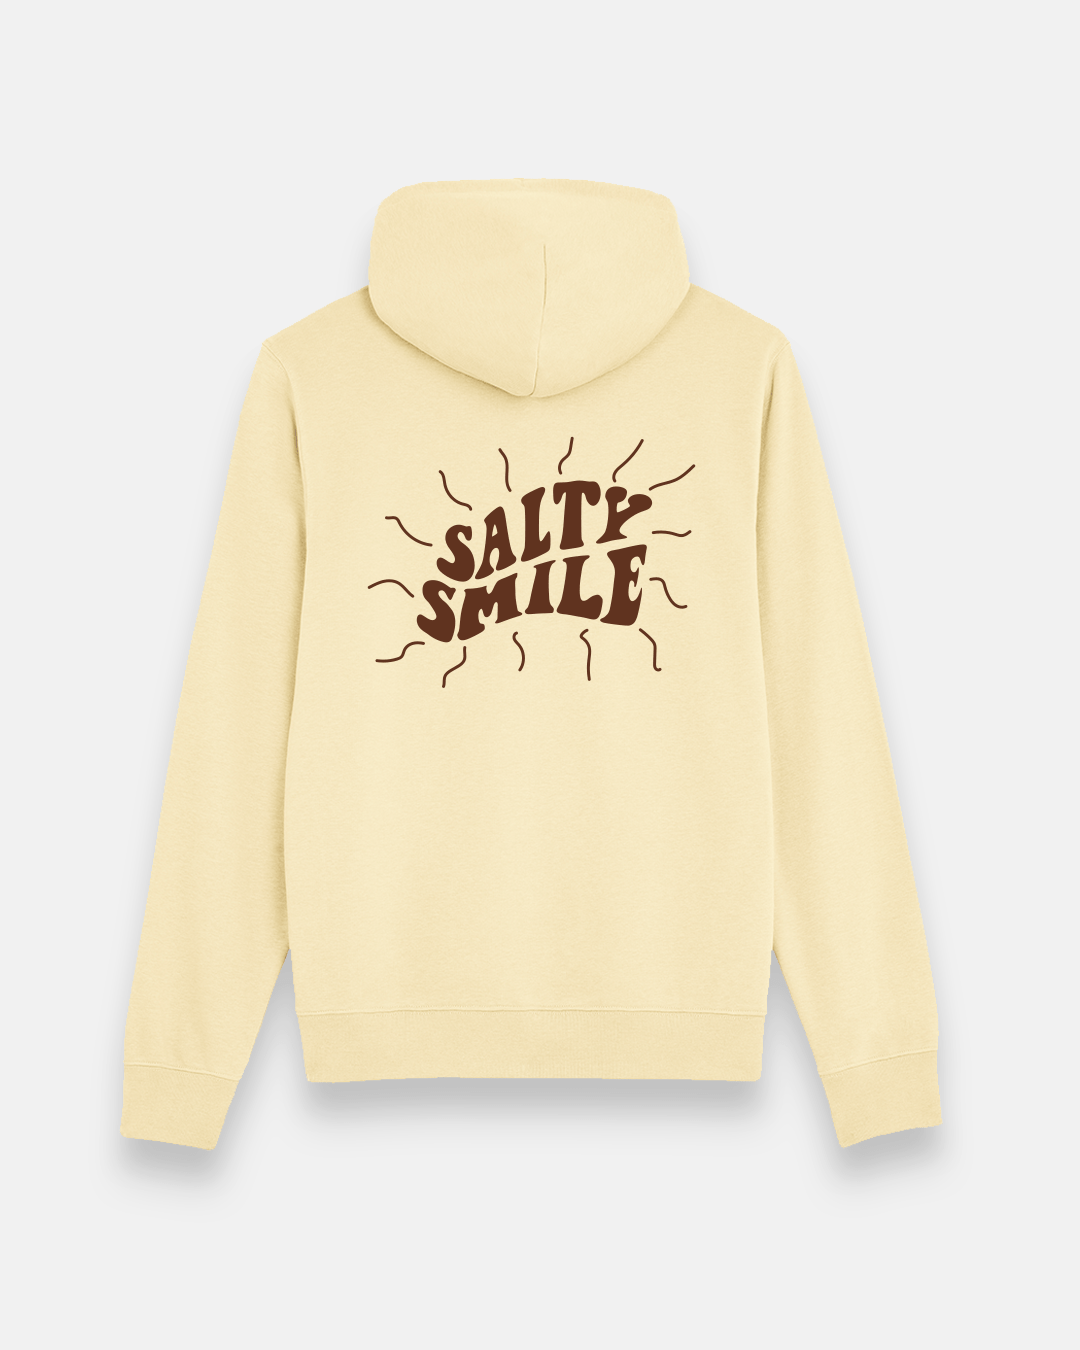 vetements surf salty smile SUMMER HOODIE BUTTER marque eco responsable coton bio